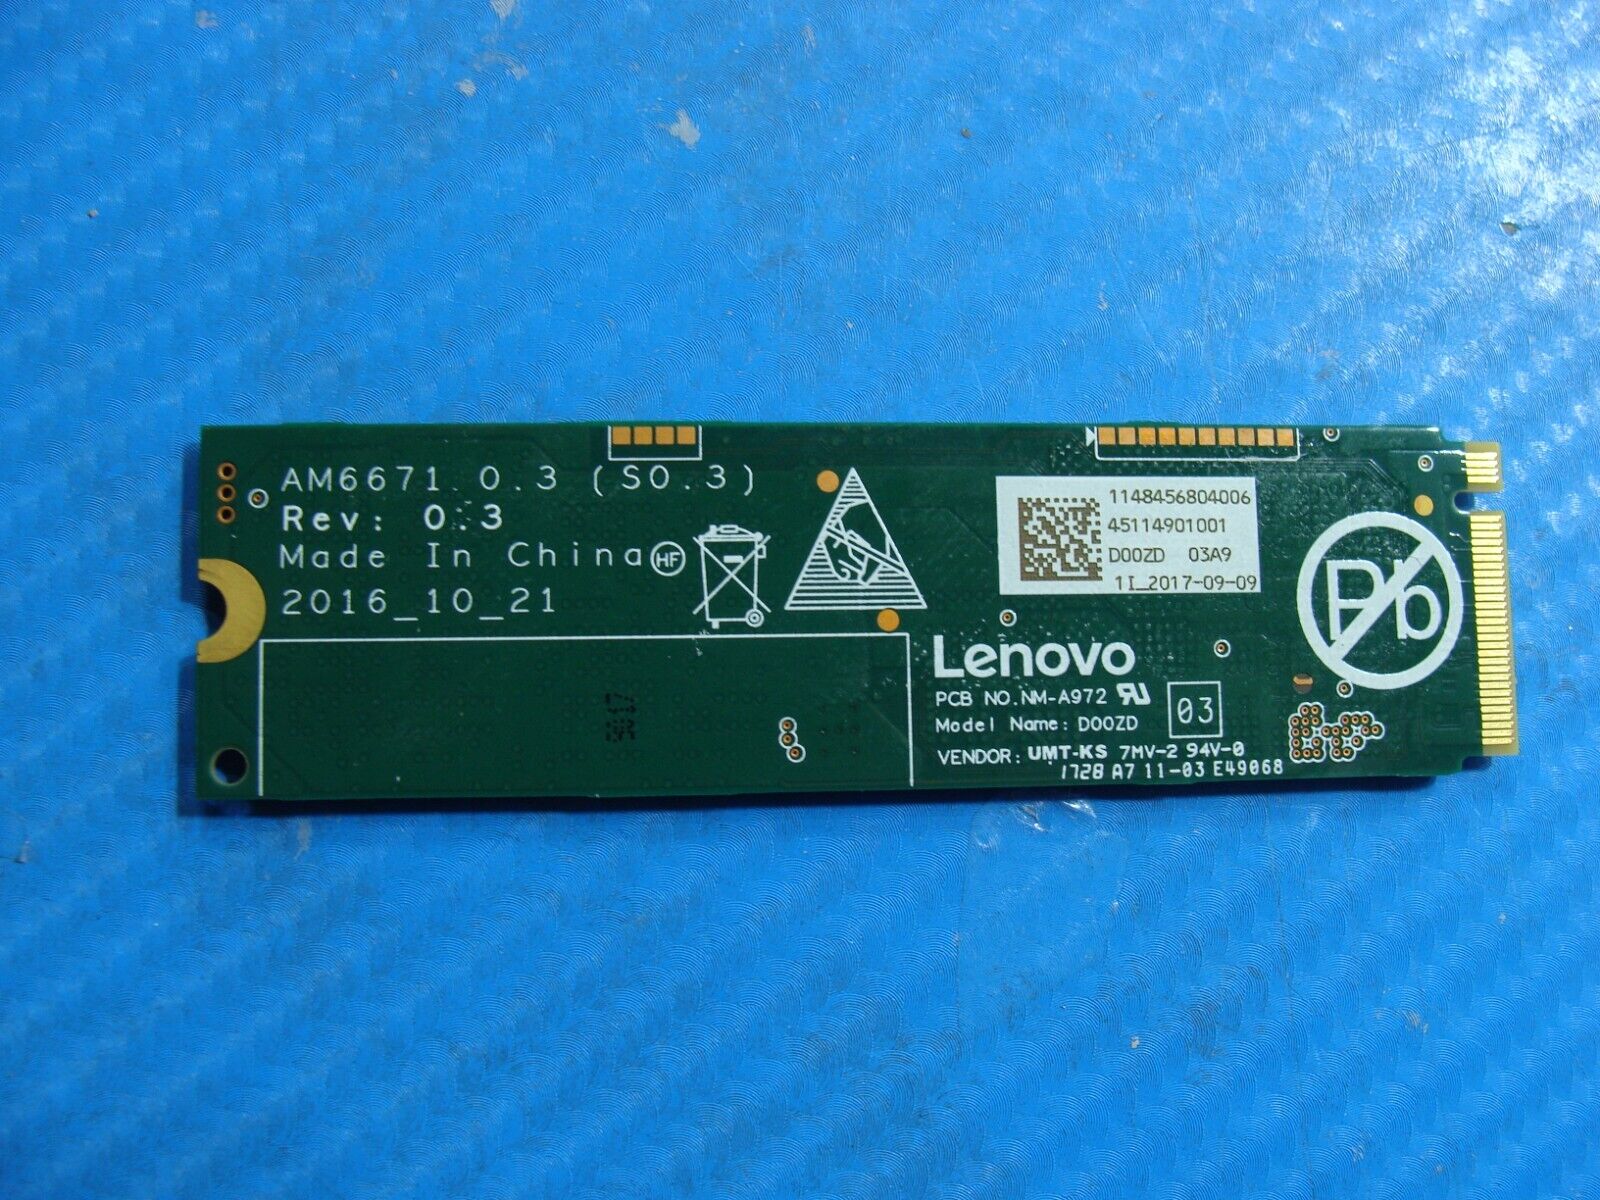 Lenovo X1 Carbon 5th Gen 256GB NVMe M.2 SSD Solid State Drive 00UP470 SSS0L25089